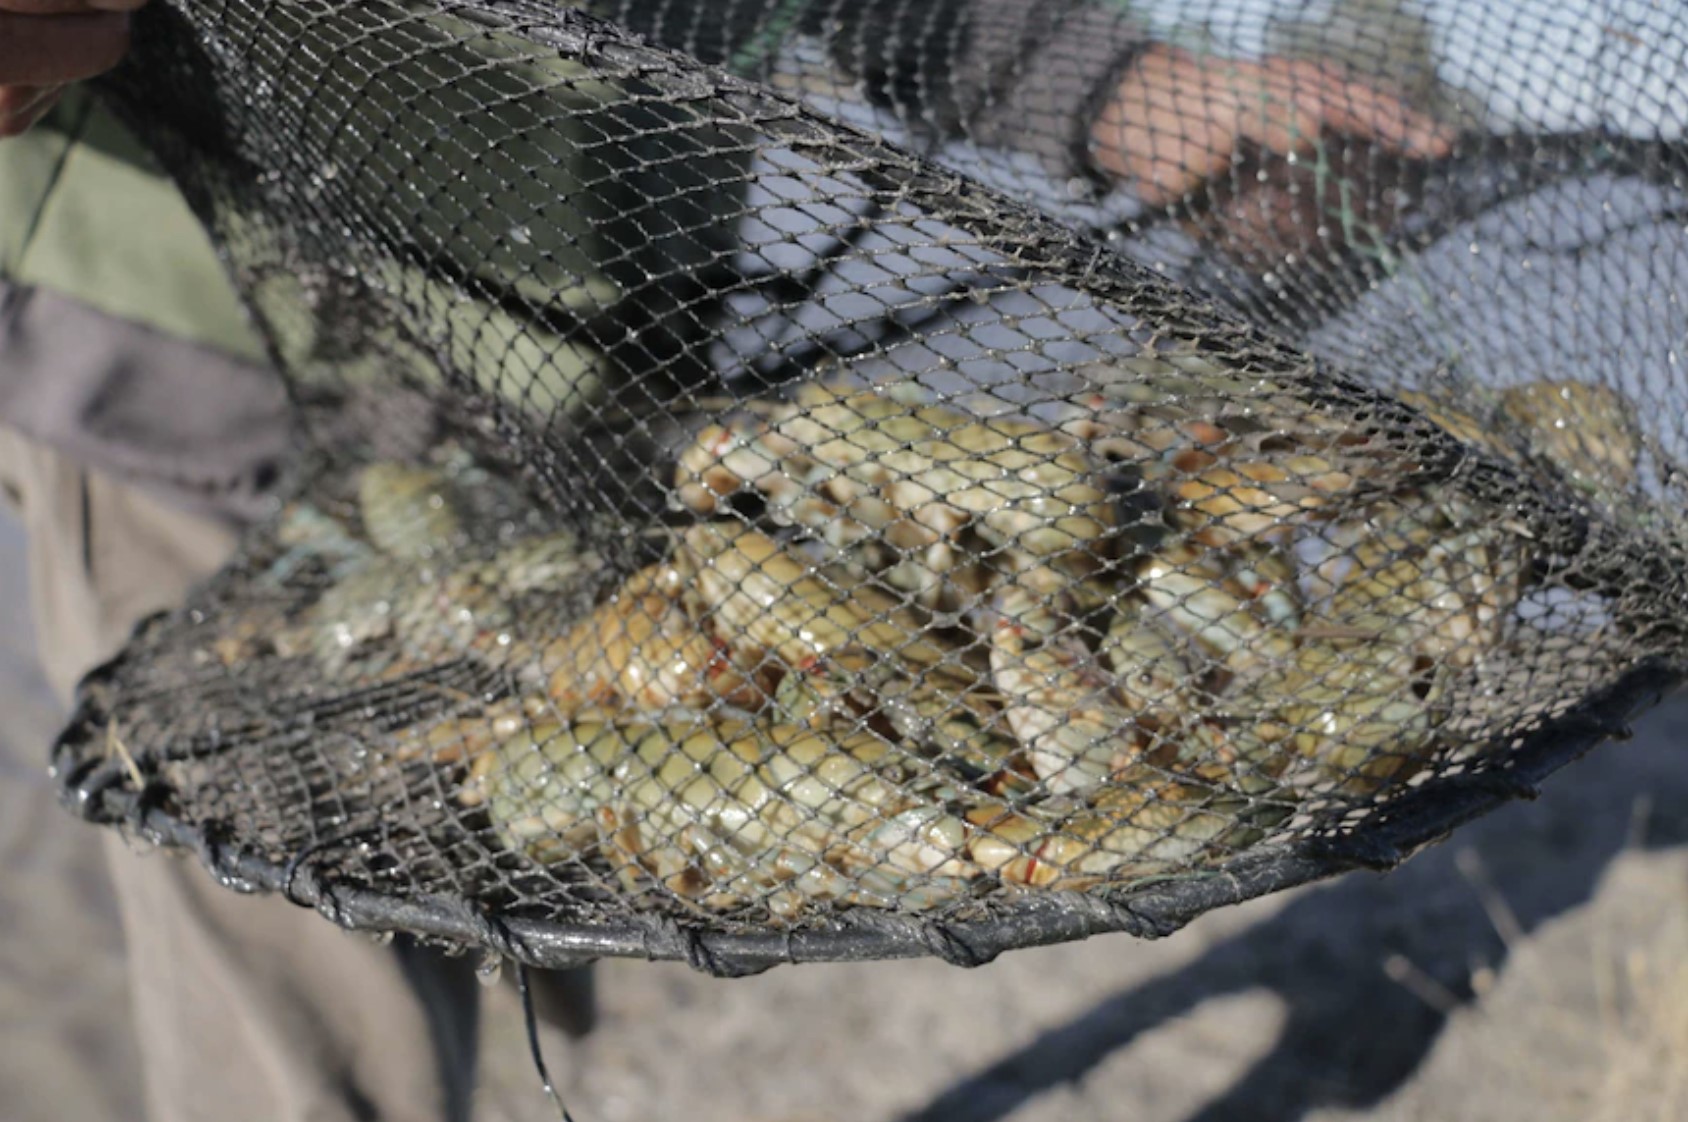 NSW Fishers encouraged to round up yabby traps to help restore